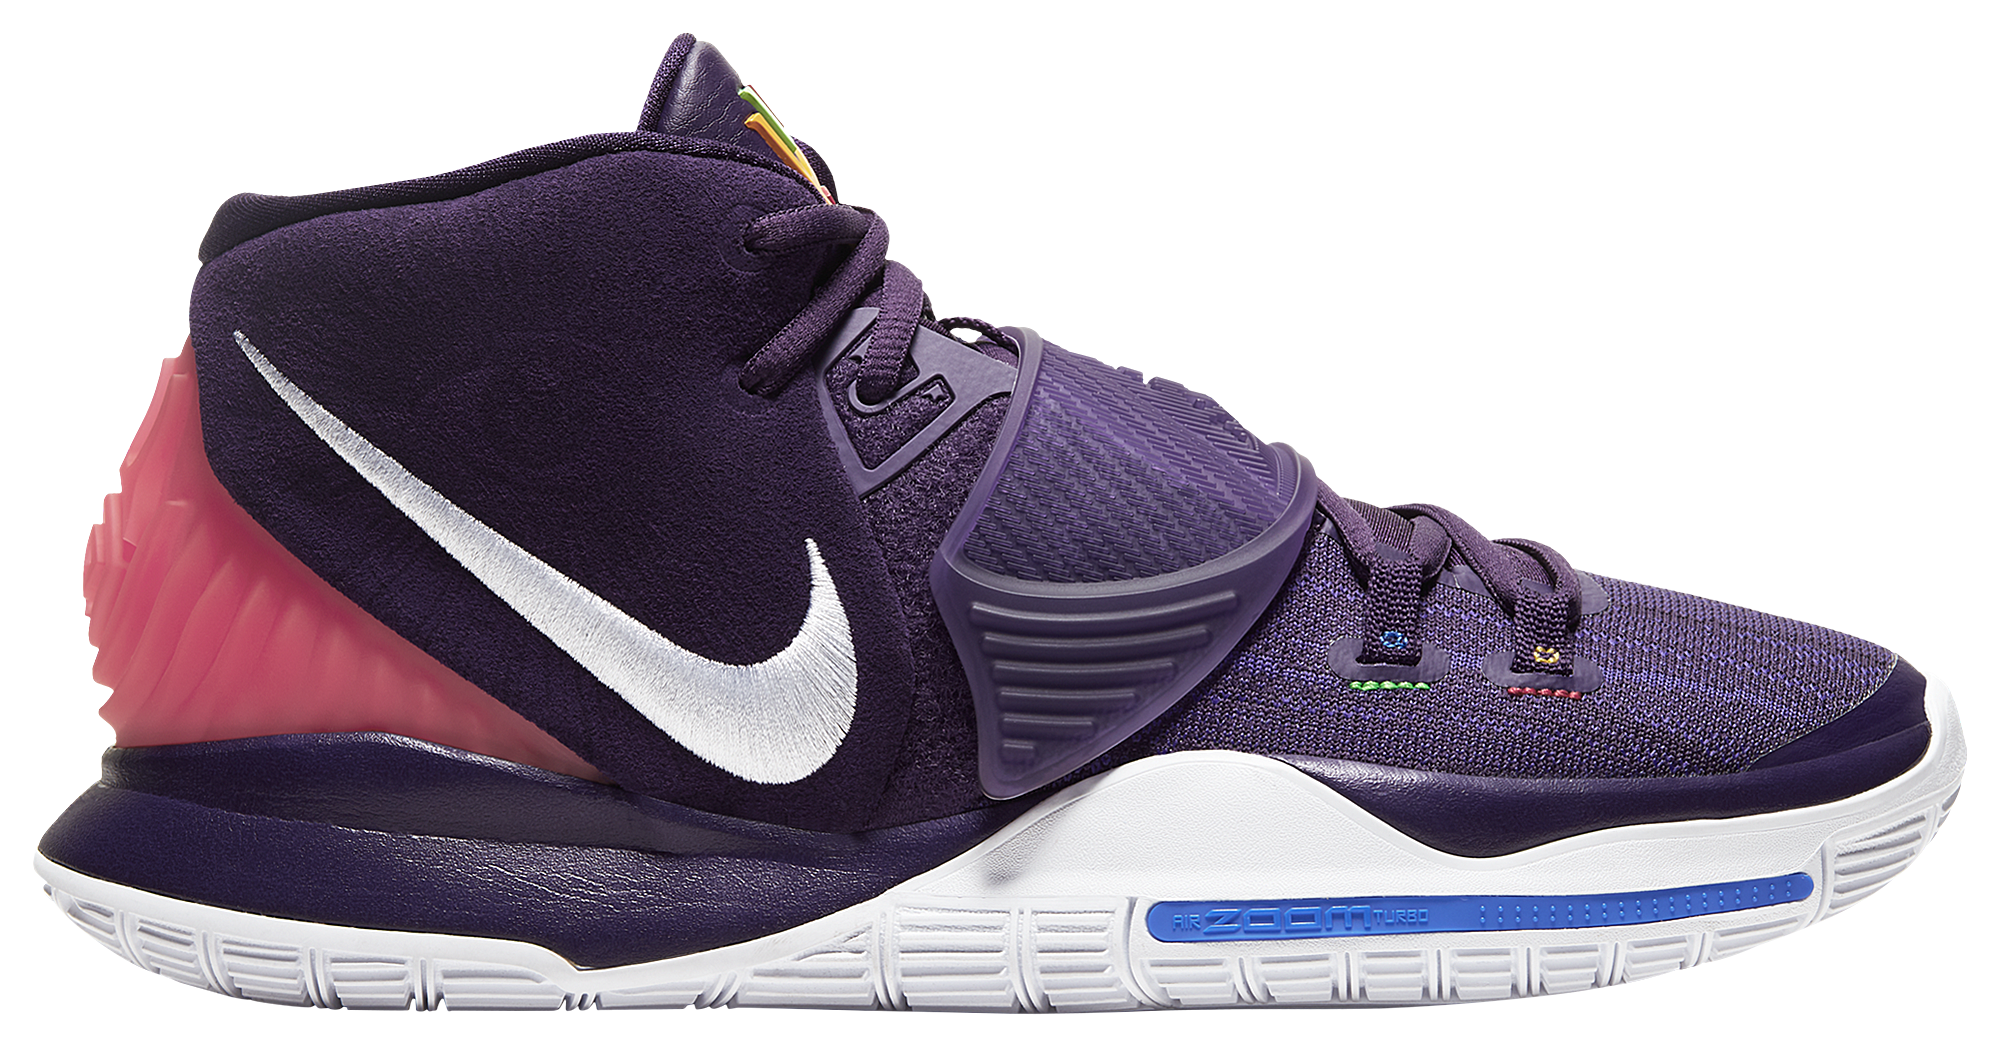 Titan 22 Nike Kyrie 5 'Have a Nike Day' Php 6295 Facebook